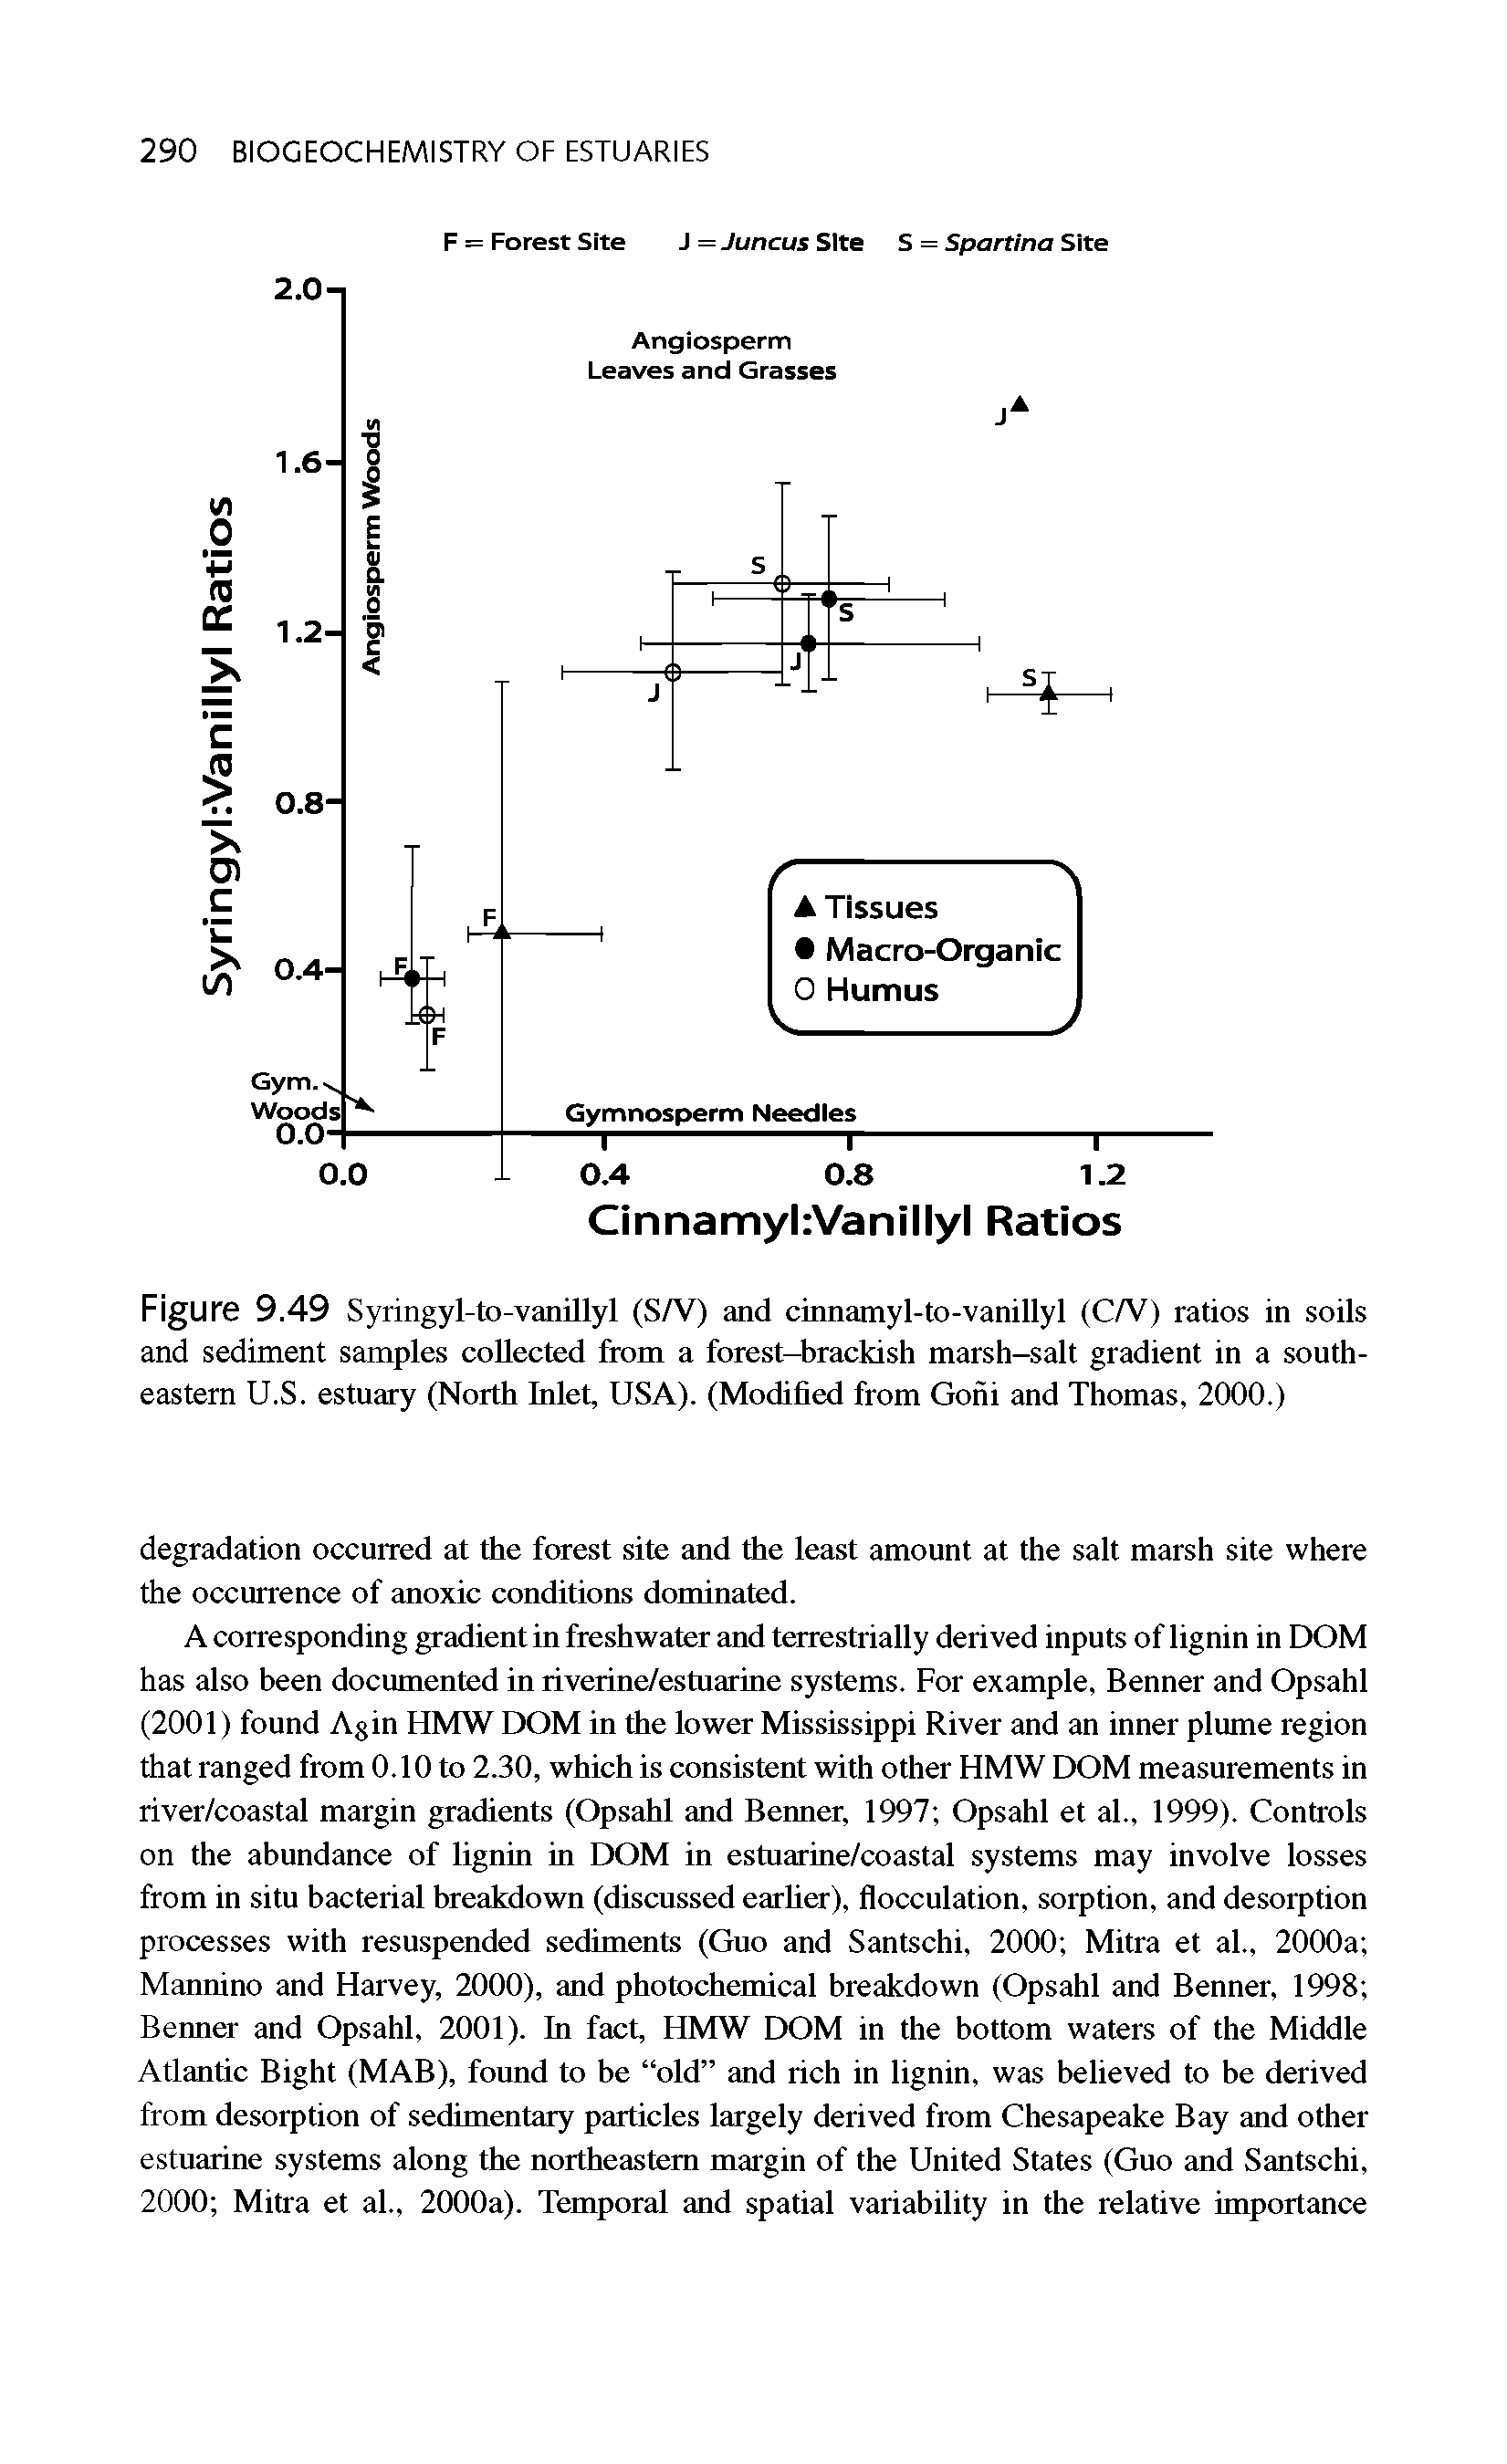 Figure 9.49 Syringyl-to-vanillyl (S/V) and cinnamyl-to-vanillyl (C/V) ratios in soils and sediment samples collected from a forest-brackish marsh-salt gradient in a southeastern U.S. estuary (North Inlet, USA). (Modified from Gorii and Thomas, 2000.)...